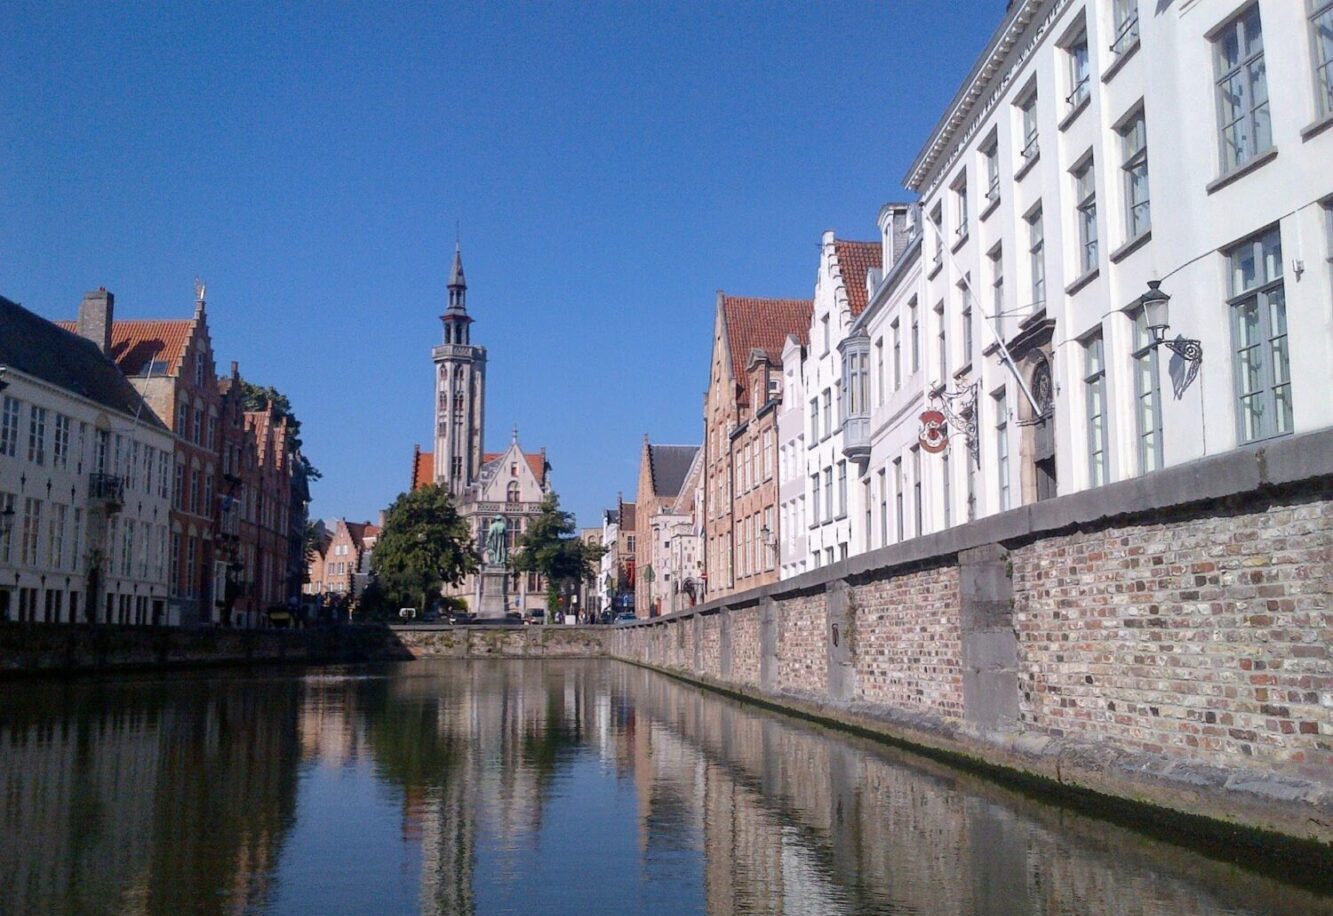 A view down the canals of Bruges toward Poortersloge (Burghers’ Lodge)